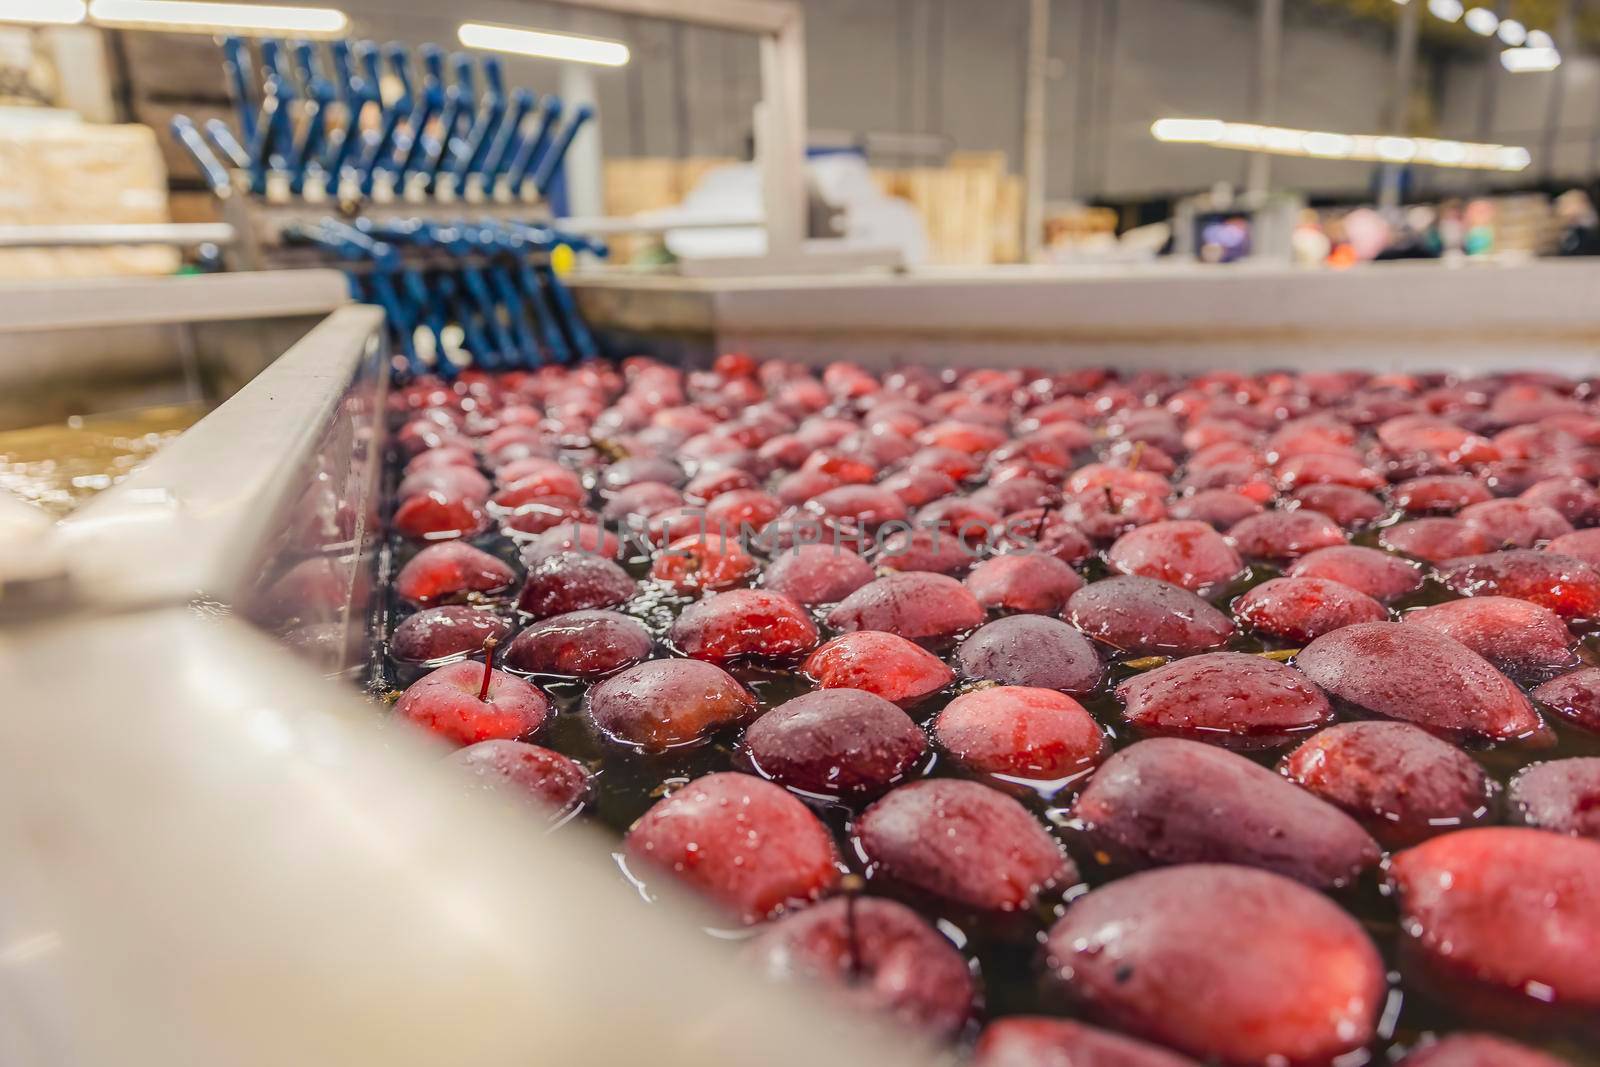 washing red apples in large quantities for further transfer to the packaging line by zokov